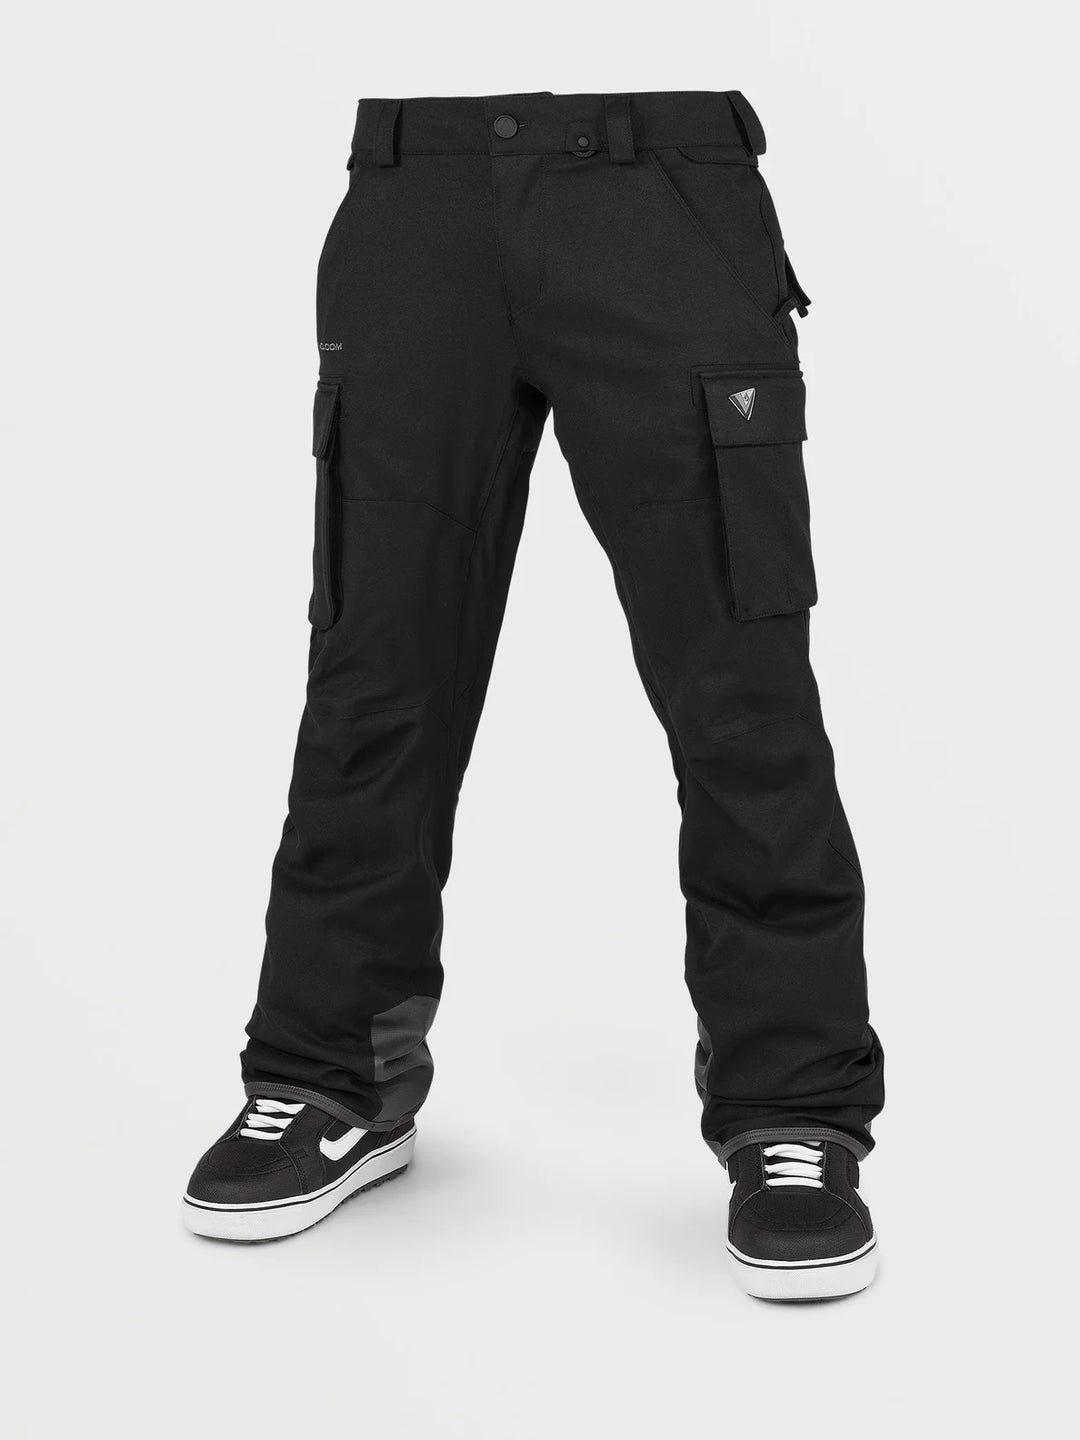 Volcom New Articulated Snowboard Pants Black